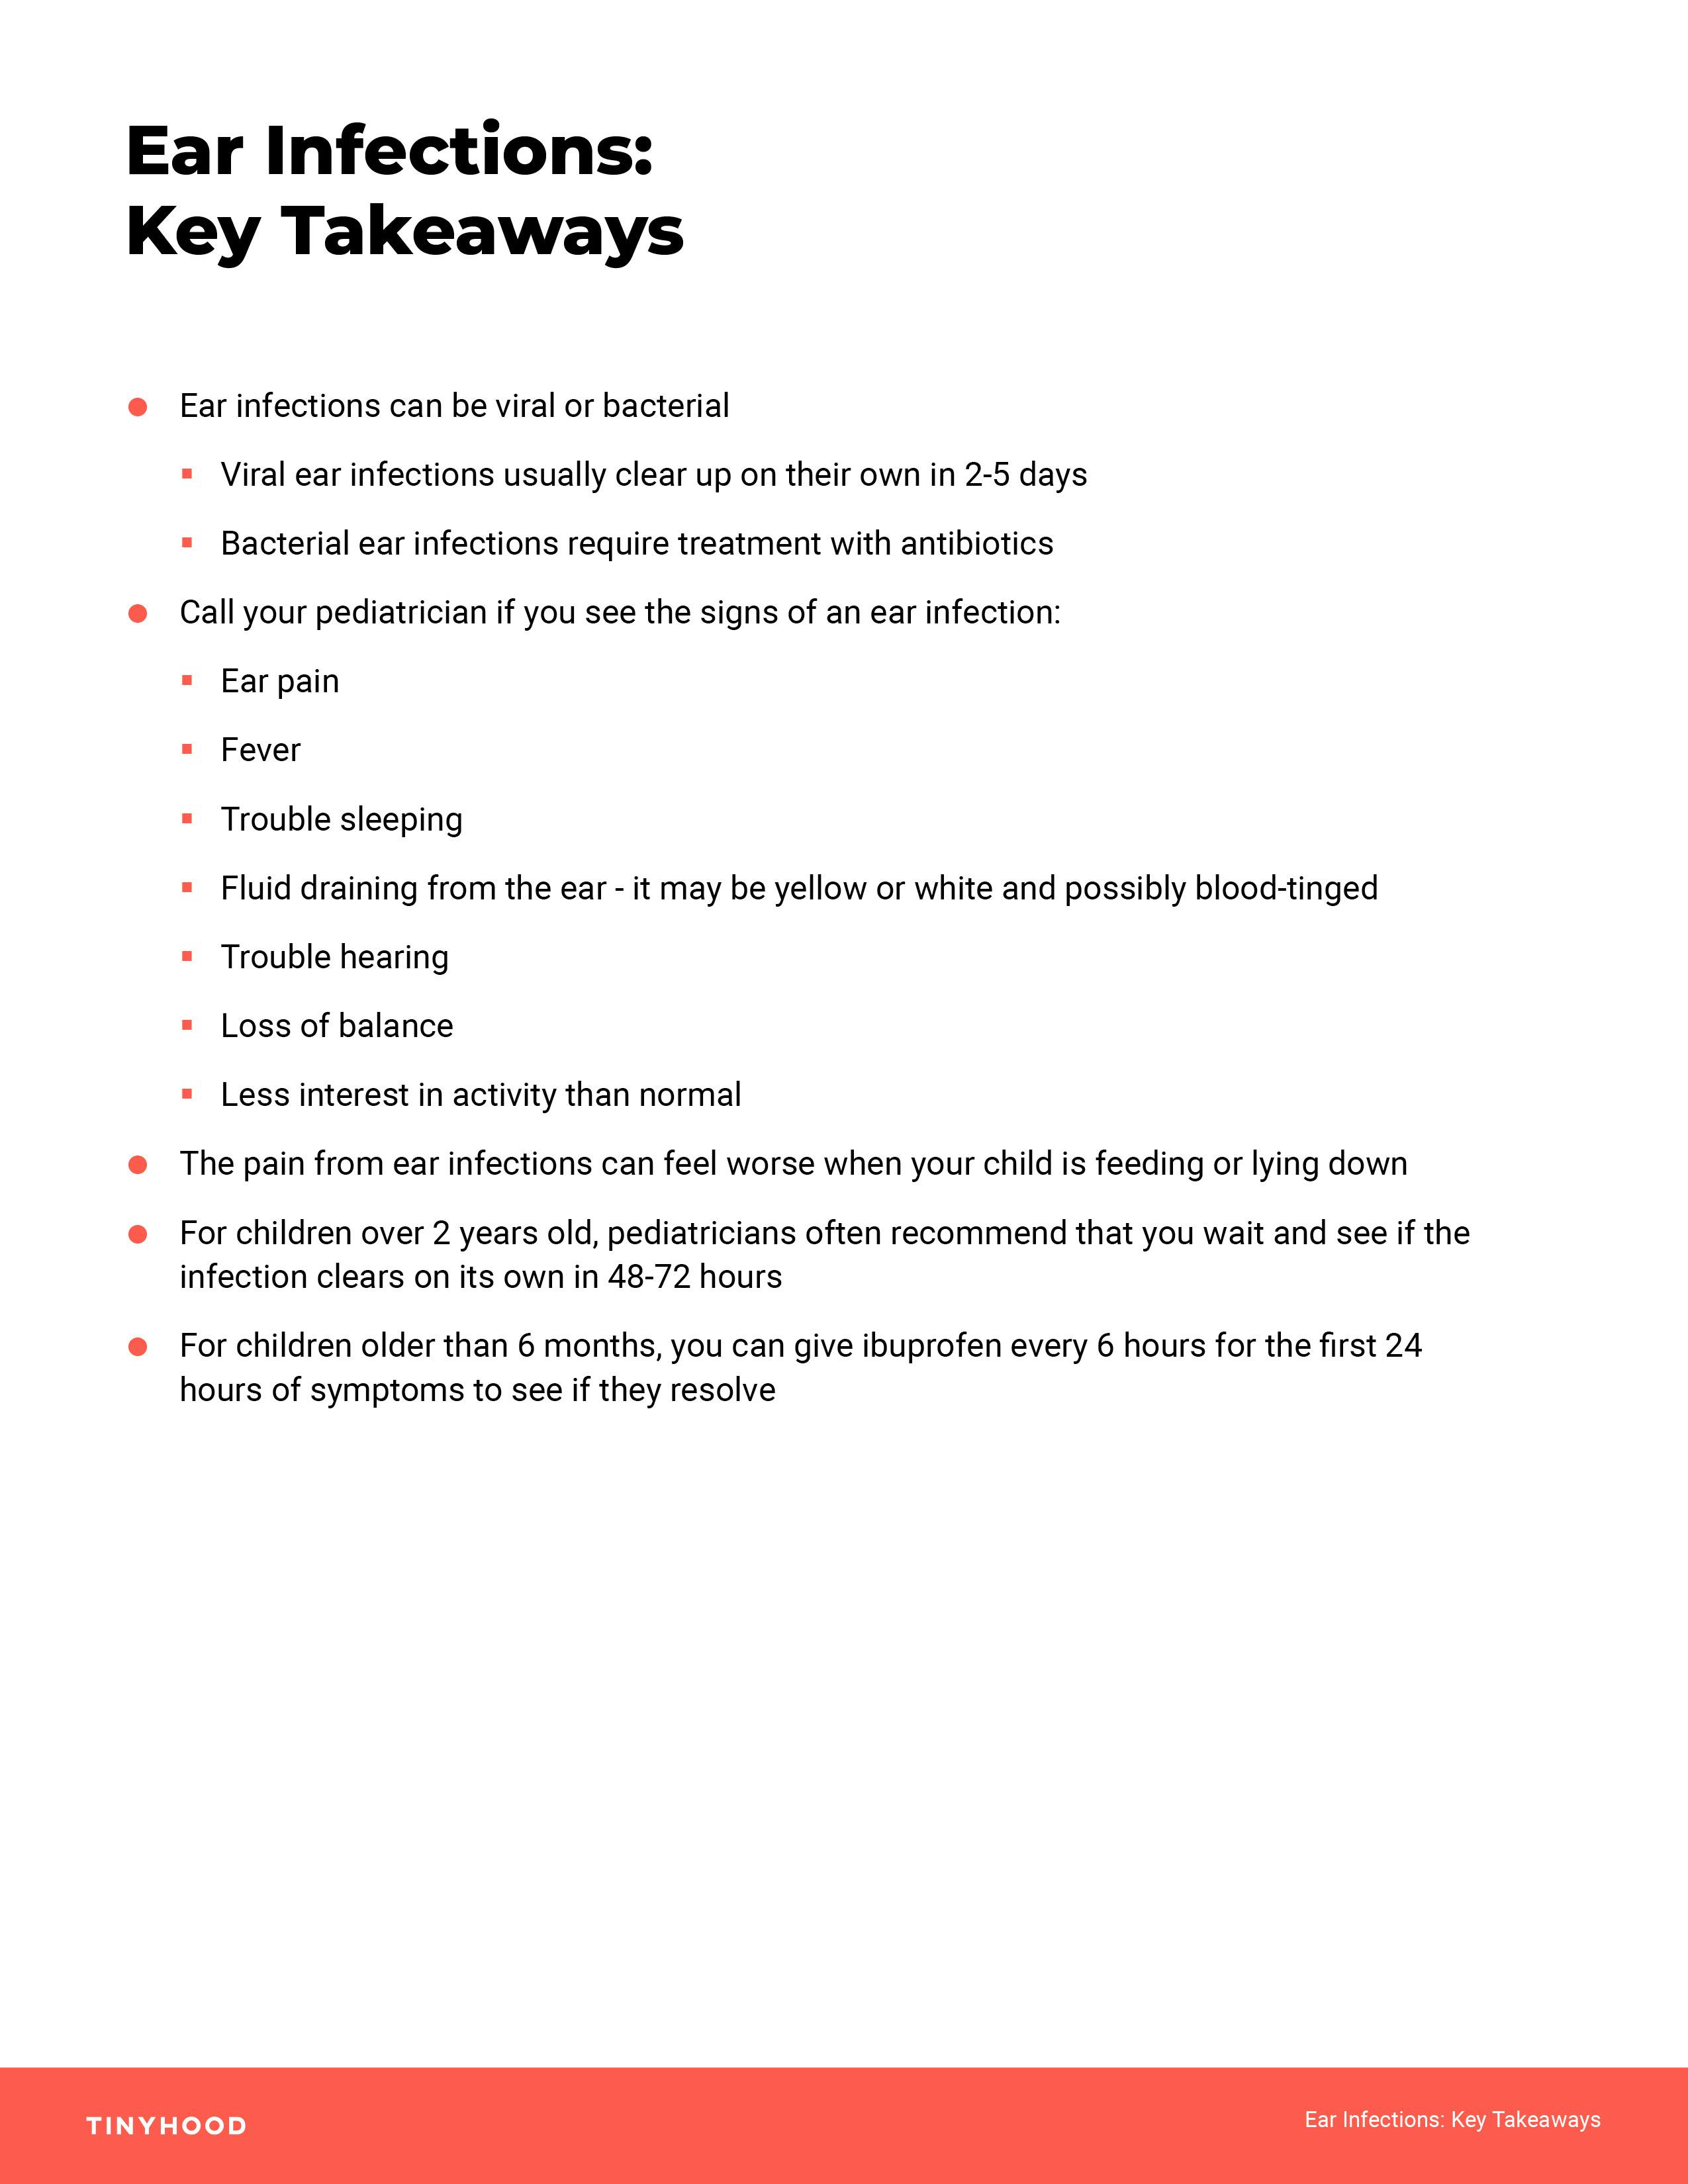 Preview image of Handout: Ear Infections Key Takeaways